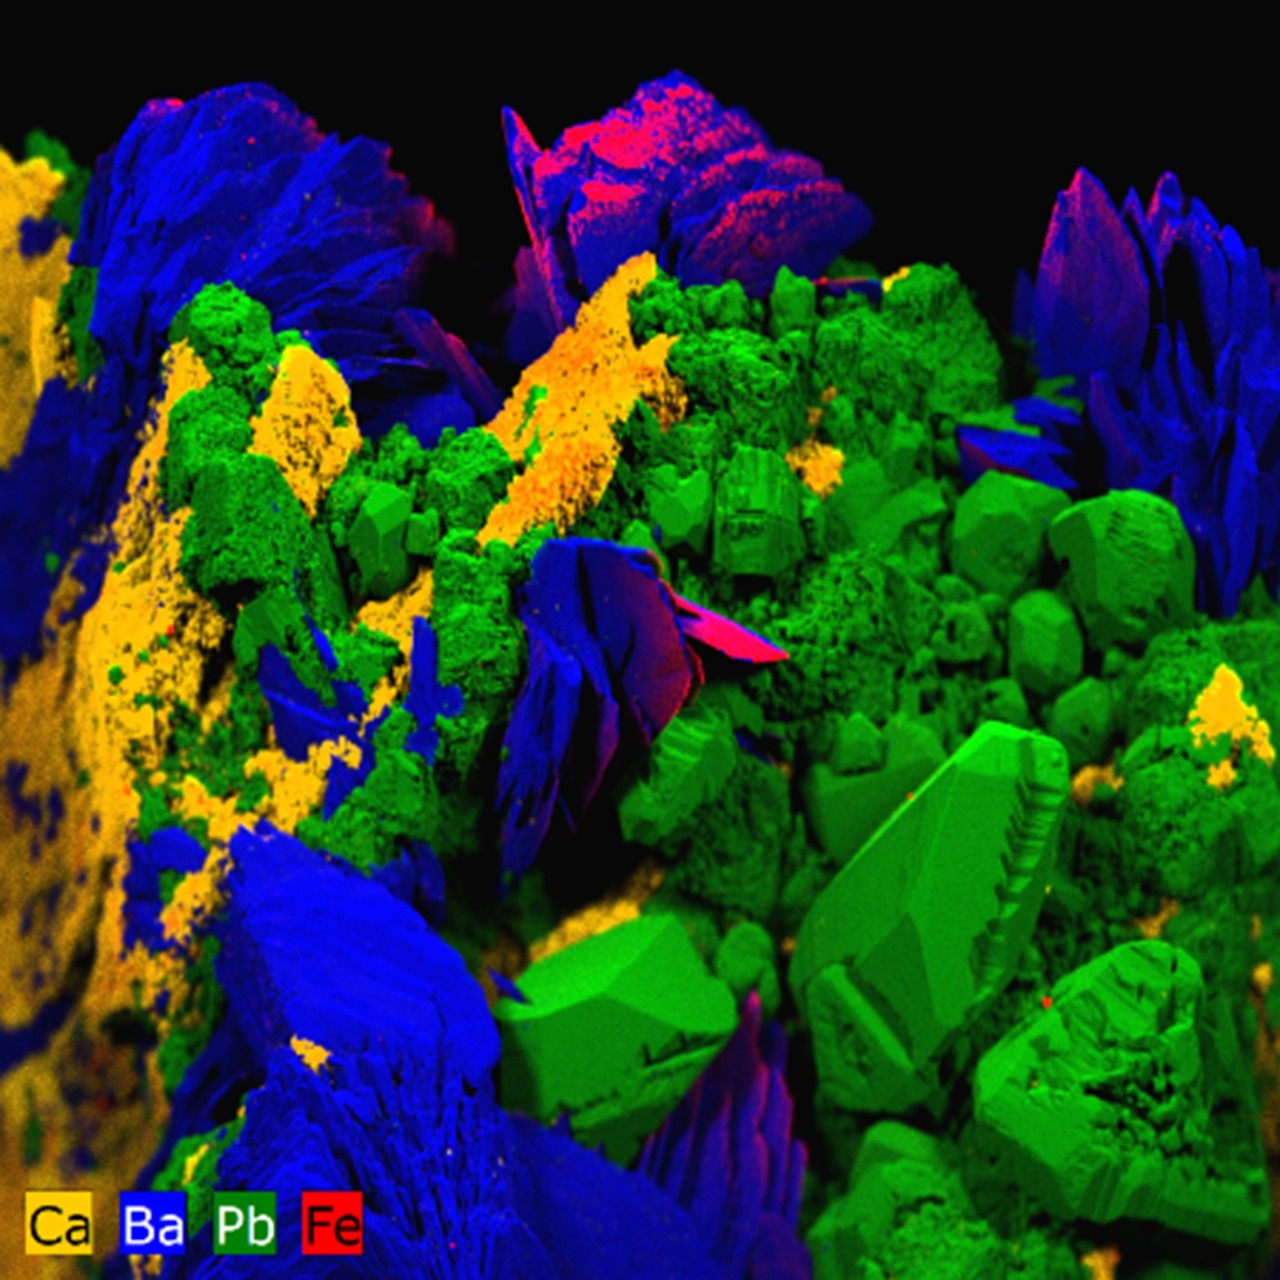 Elemental scan of a mineralogical sample of complex topography taken using micro-XRF